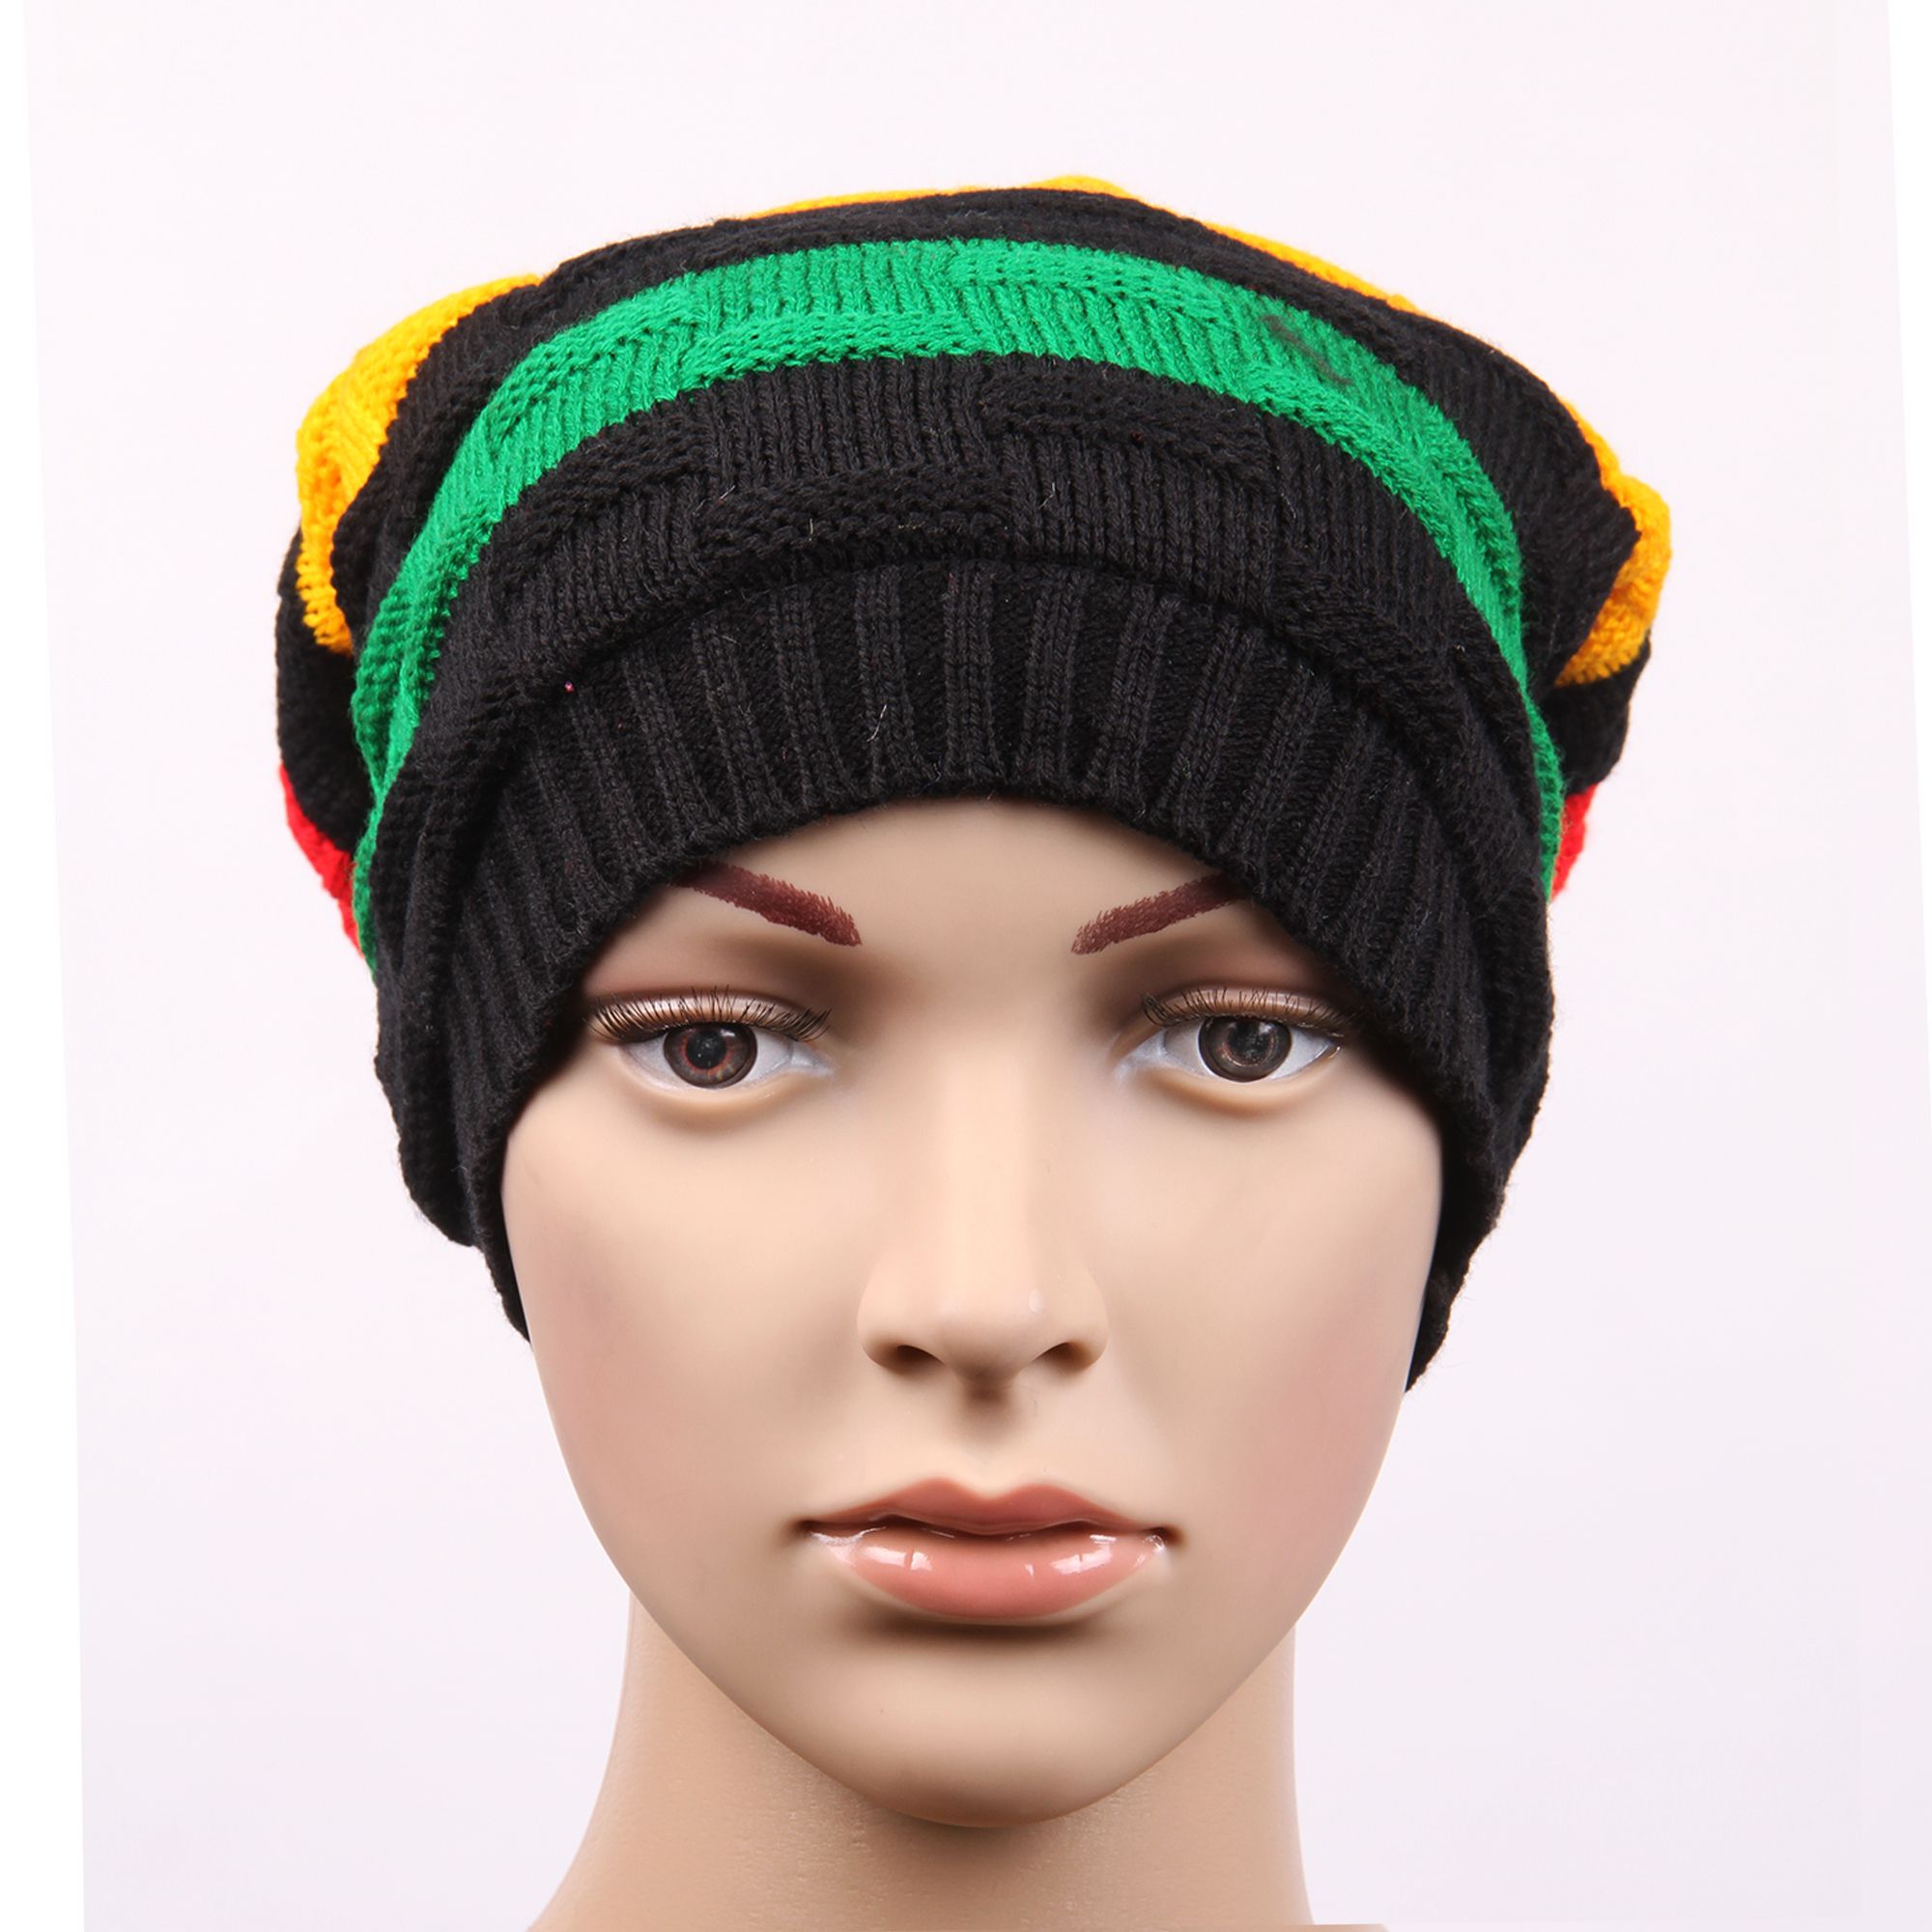 Knotyy Tri Color Beanie Cap - Buy Knotyy Tri Color Beanie Cap Online at ...